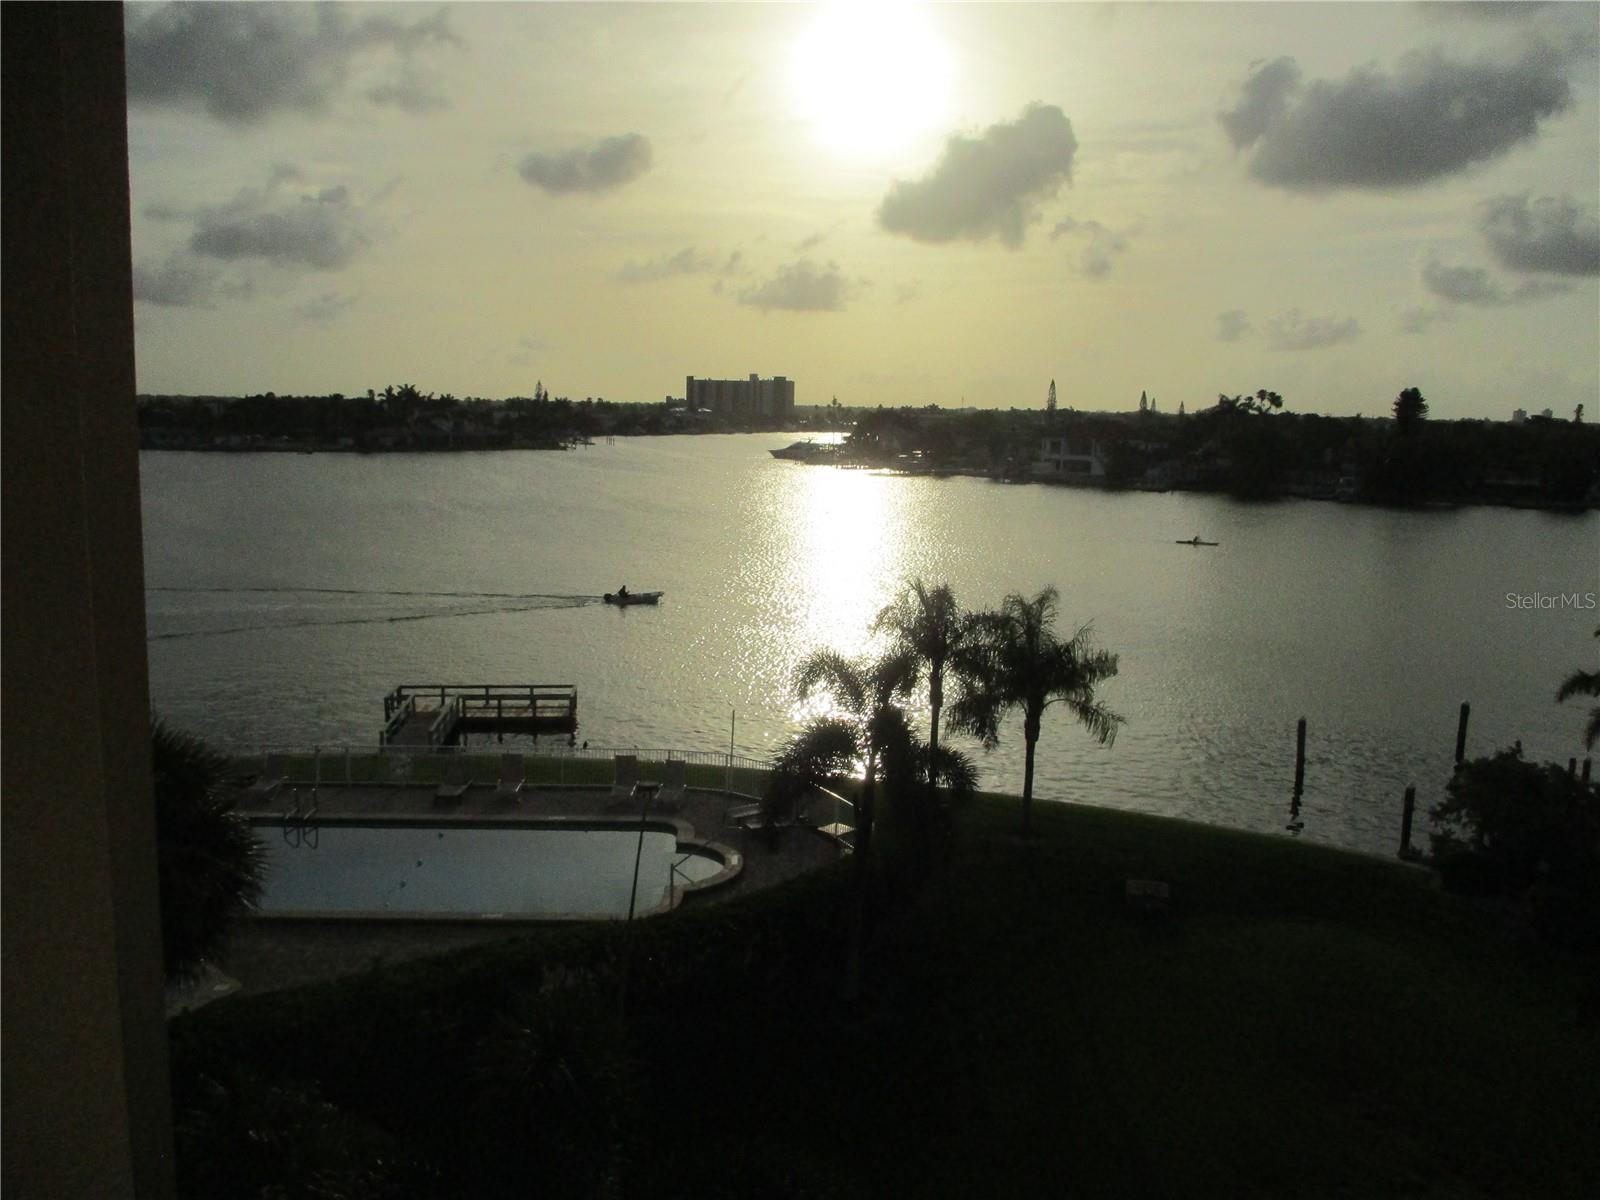 Perfect views of the intracoastal waterway